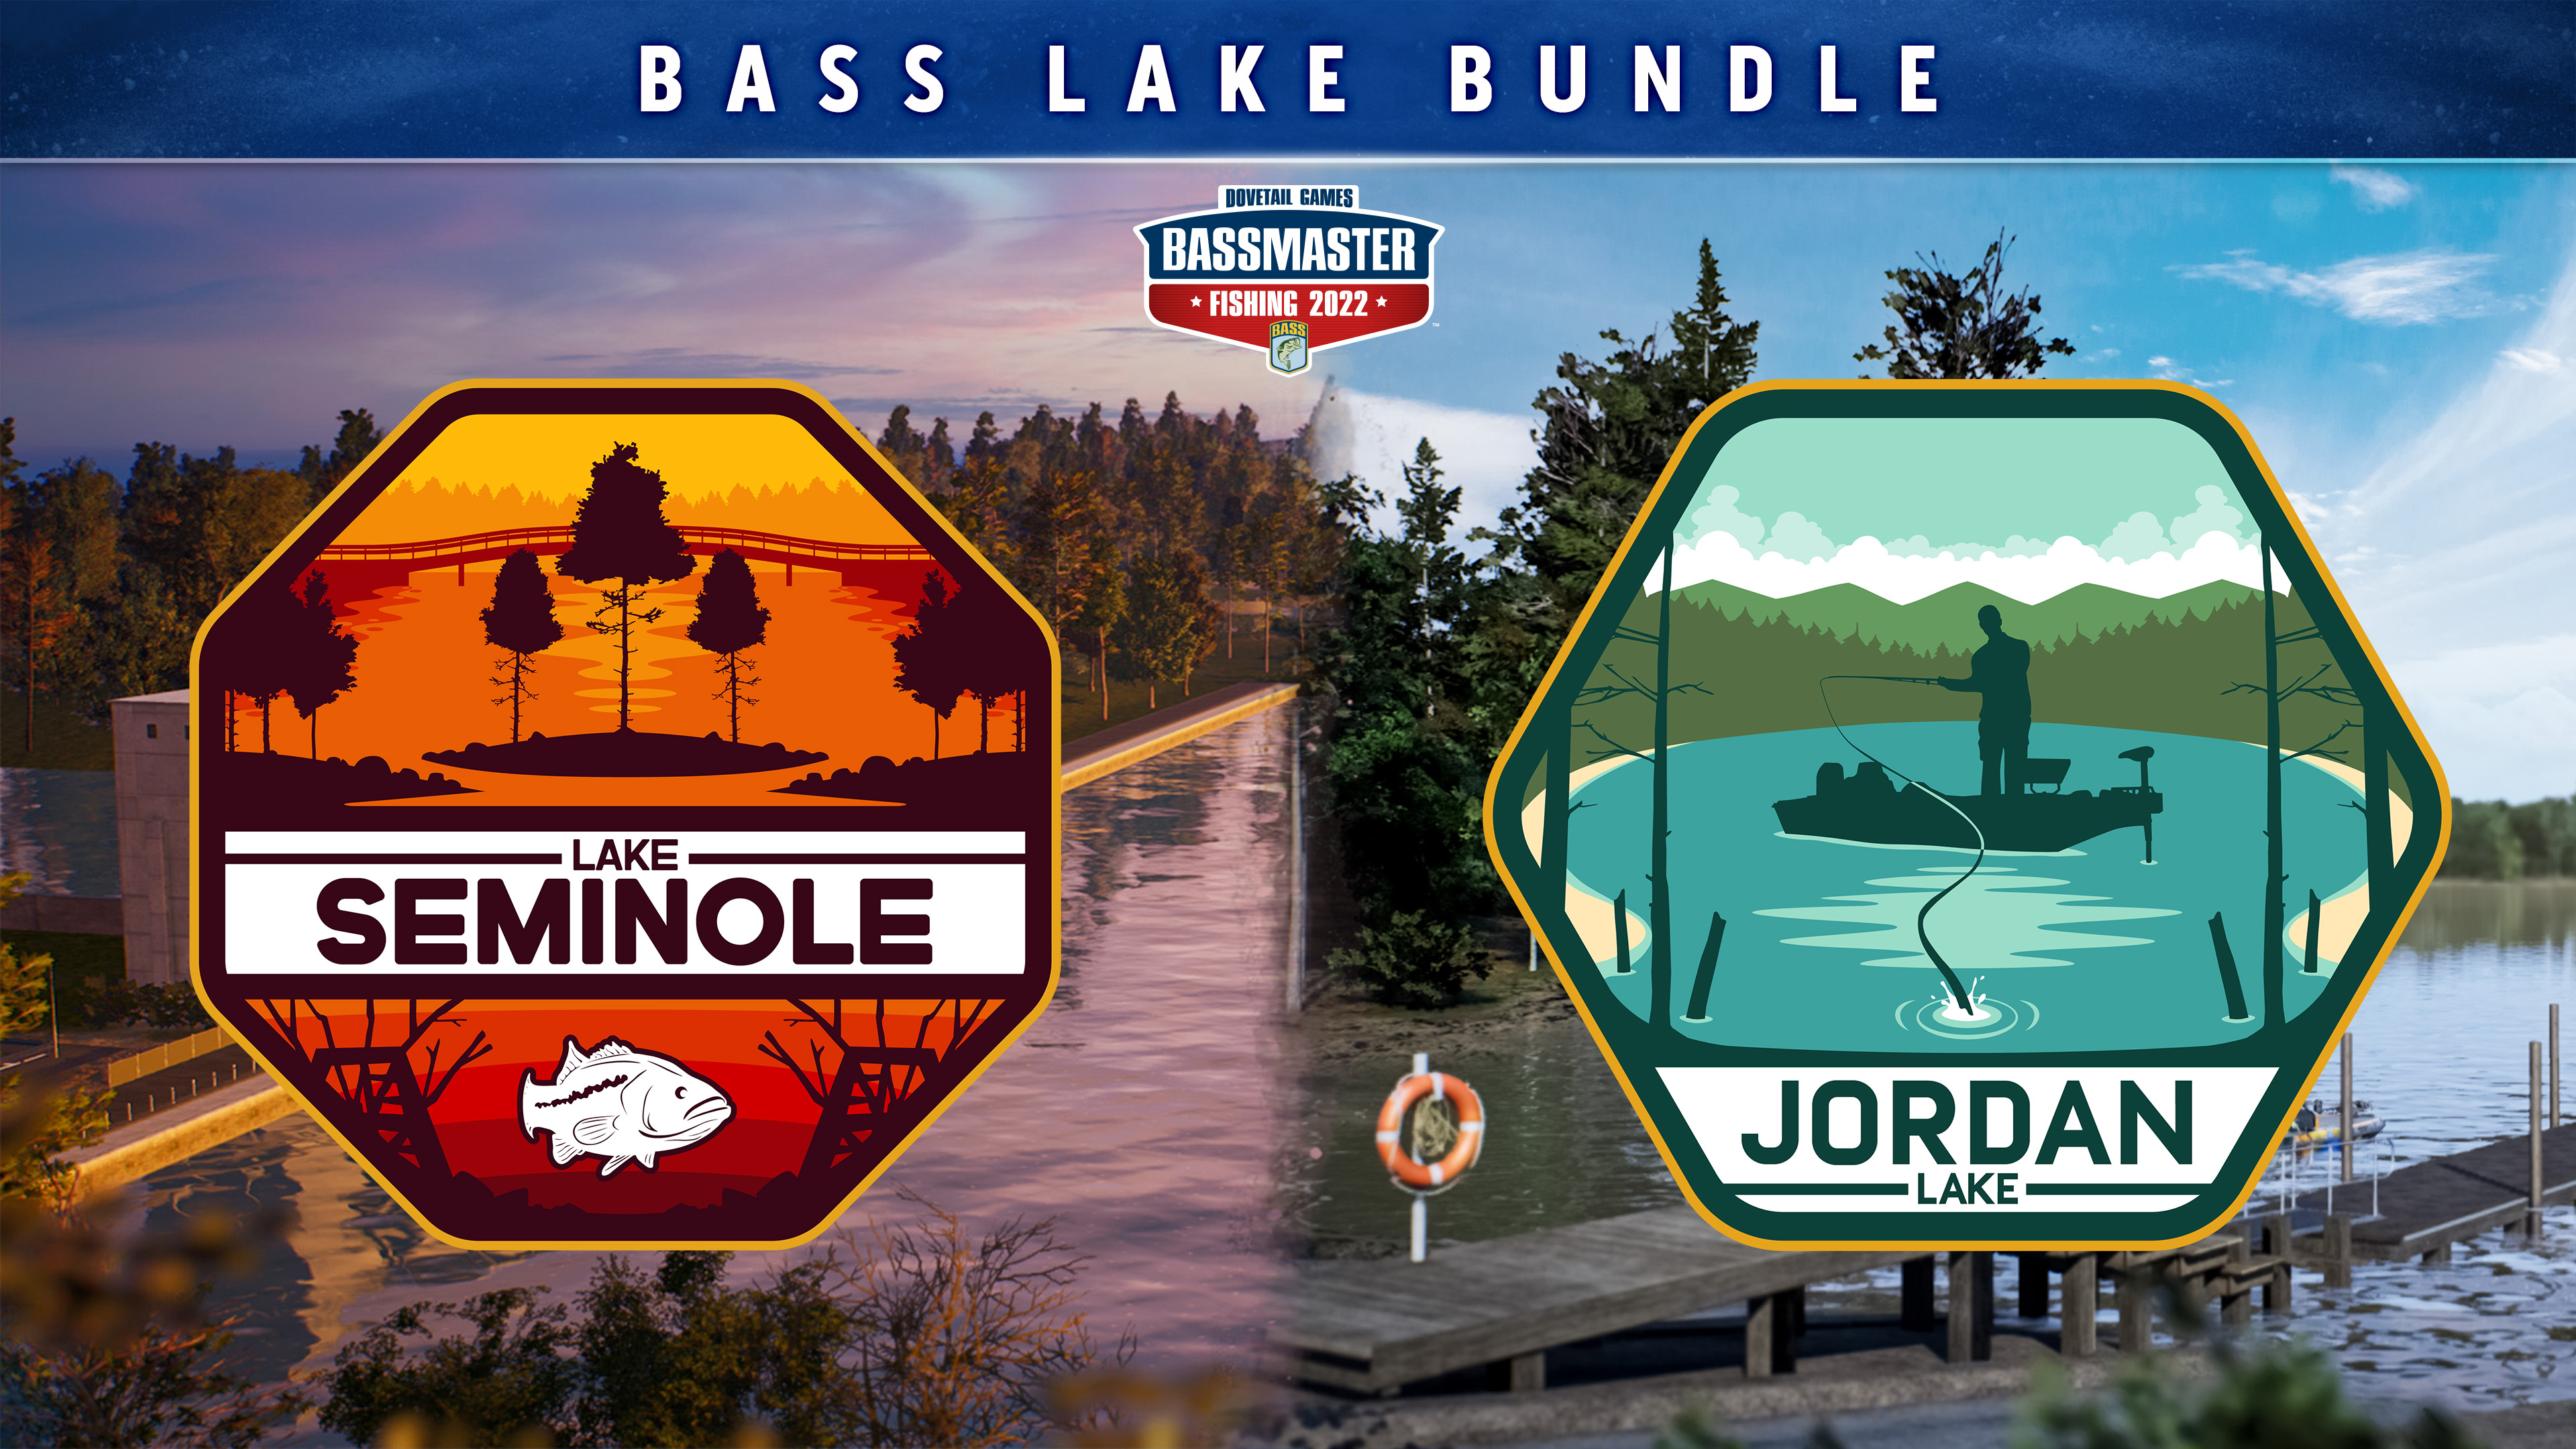 Bassmaster® \'Bass 2022 Bass Bundle\' Basin Land Fishing the Lake Studio Available in PR ONE Now DLC, a Big -